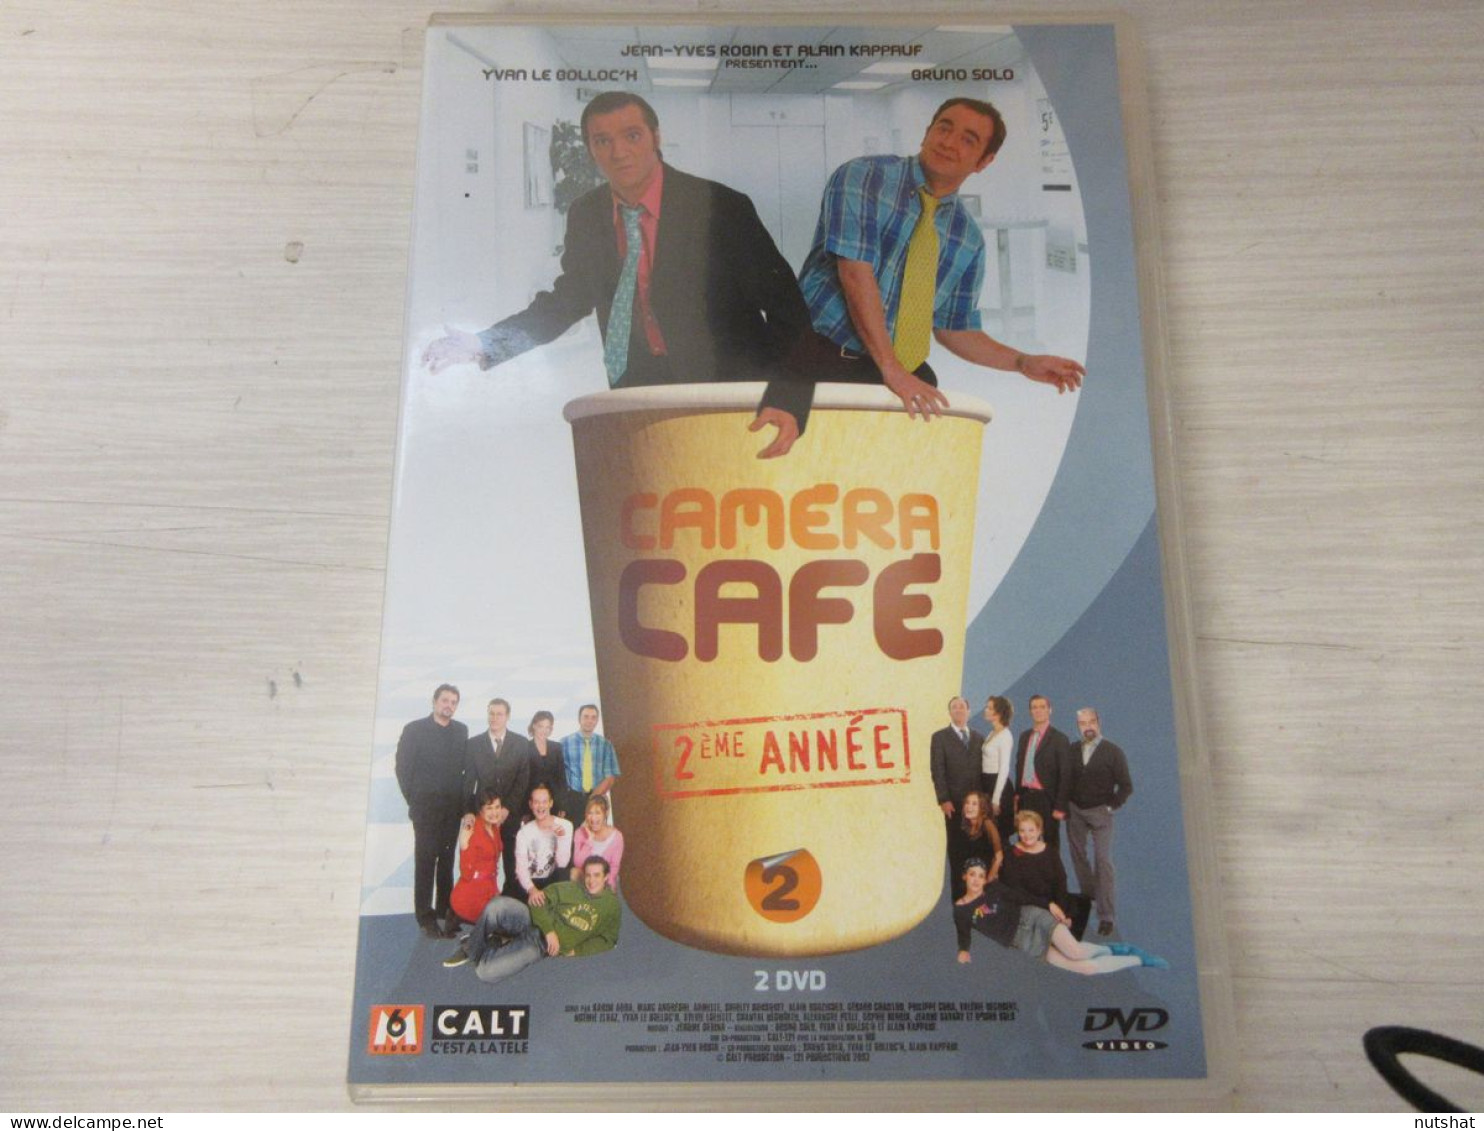 DVD SERIE TV CAMERA CAFE 2eme ANNEE Bruno SOLO Yvan Le BOLLOC'H 2xDVD 2002  - TV Shows & Series